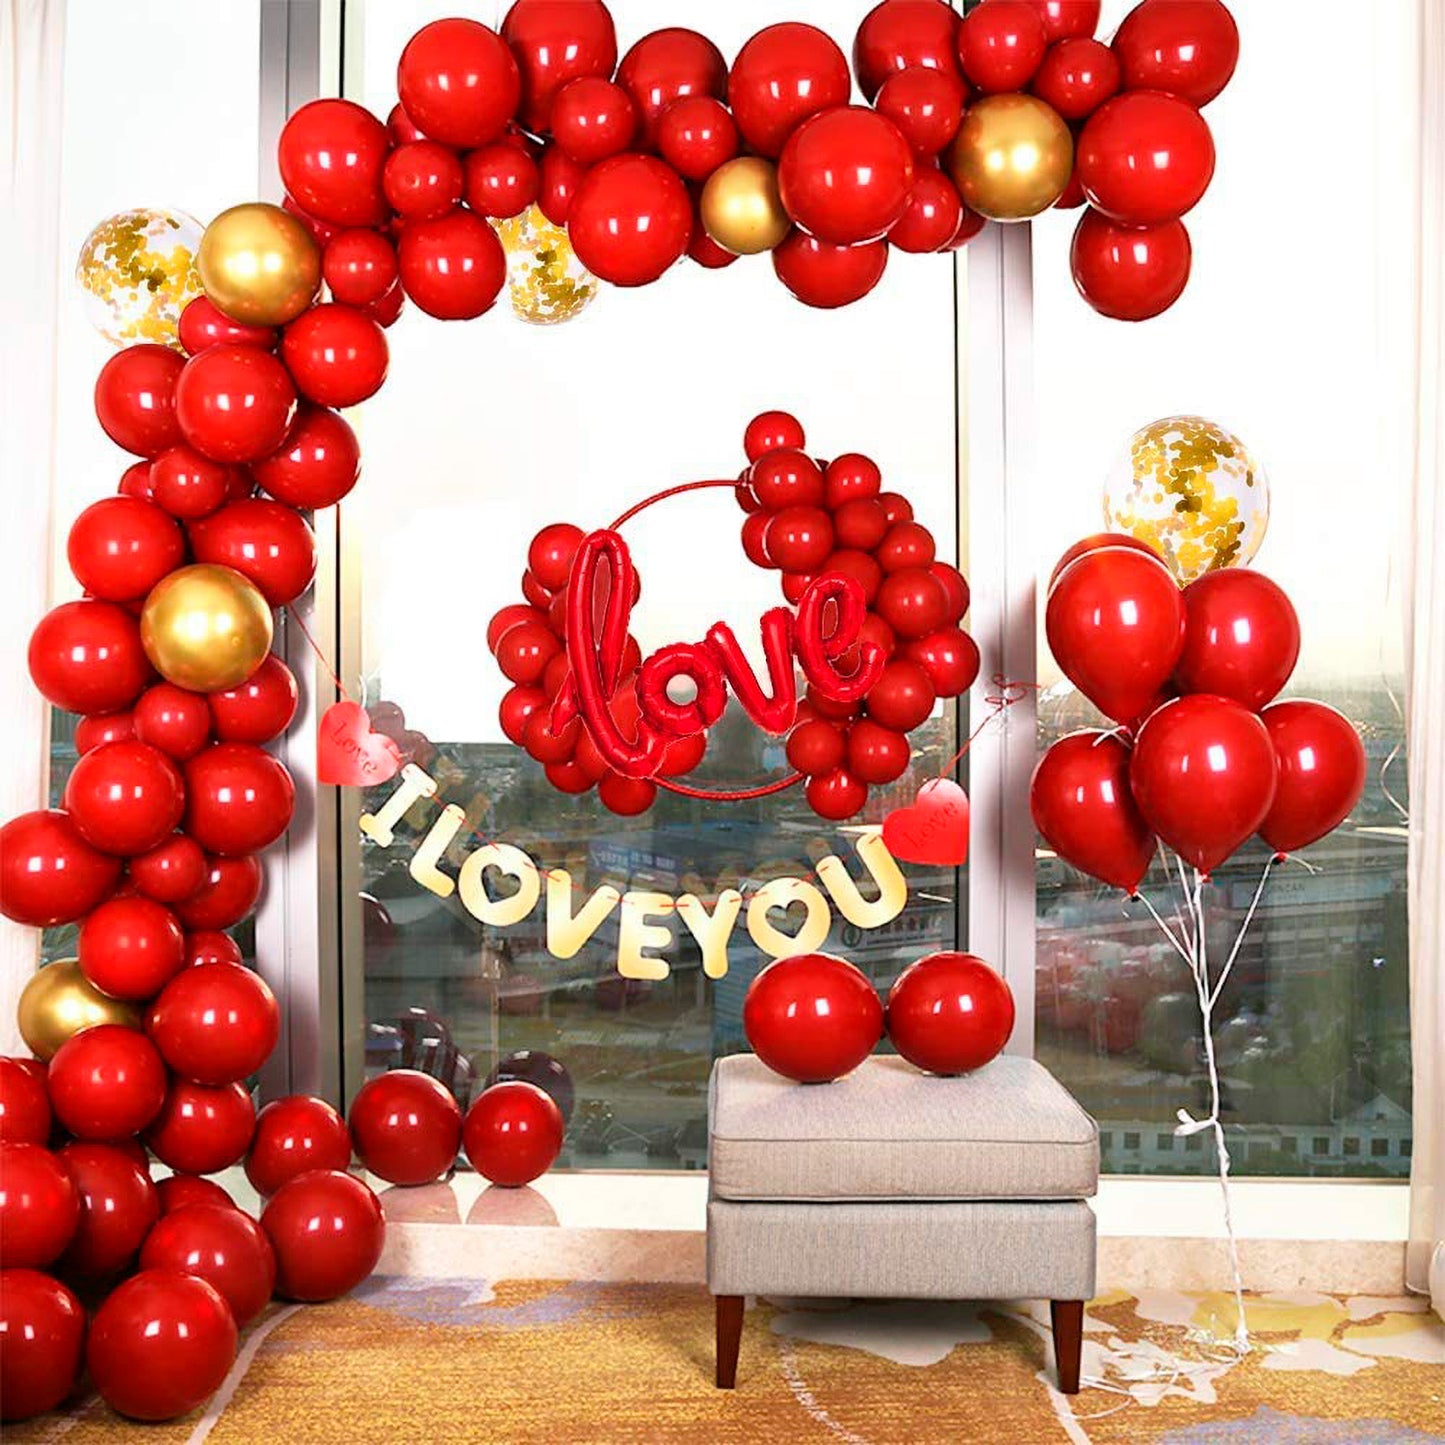 72" giant scarlet red wholesale balloon decoration